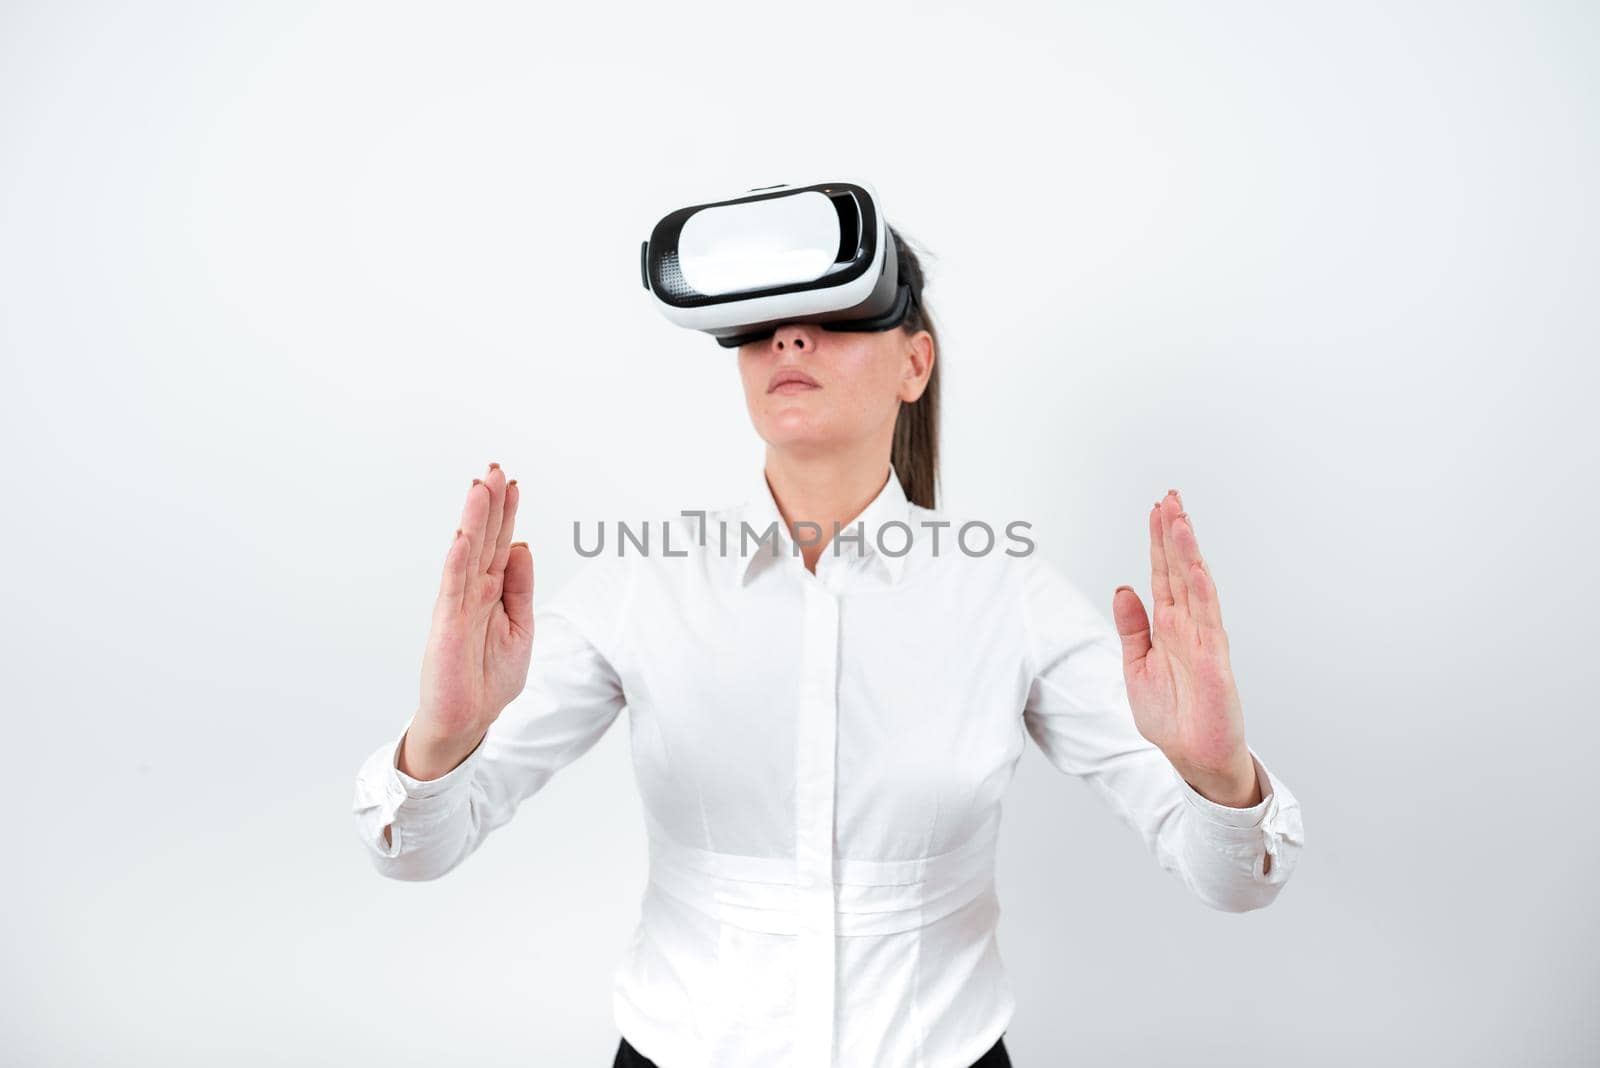 Woman Wearing Vr Glasses And Presenting Important Messages Between Hands.